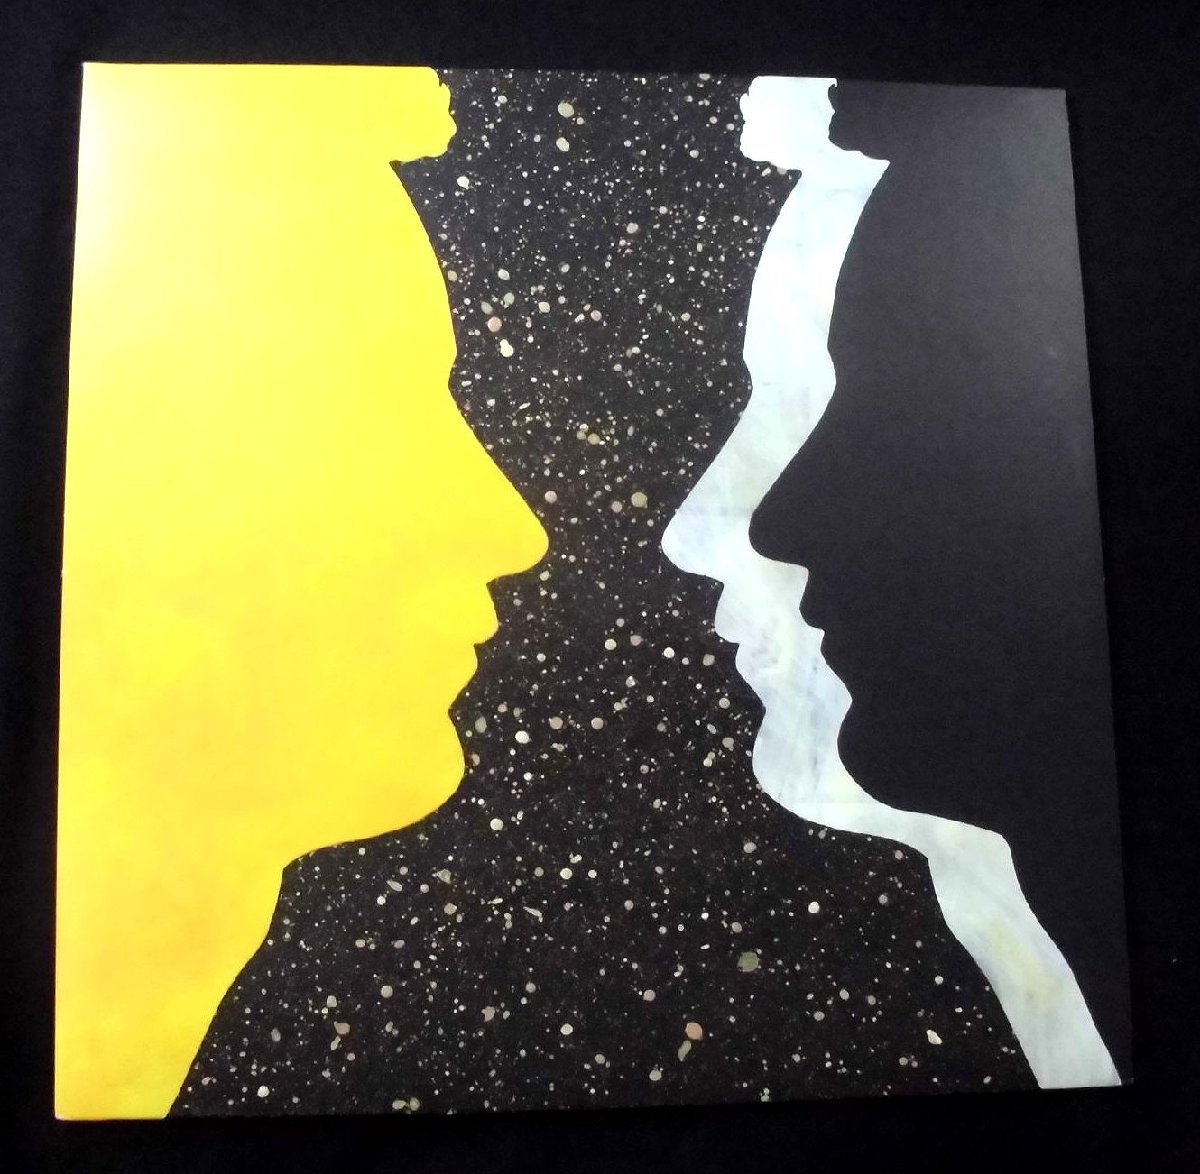 ■EU-Beyond The Grooveオリジナル2LP,””Limited Edition,Yellow-Vinyl!!”” Tom Misch / Geography